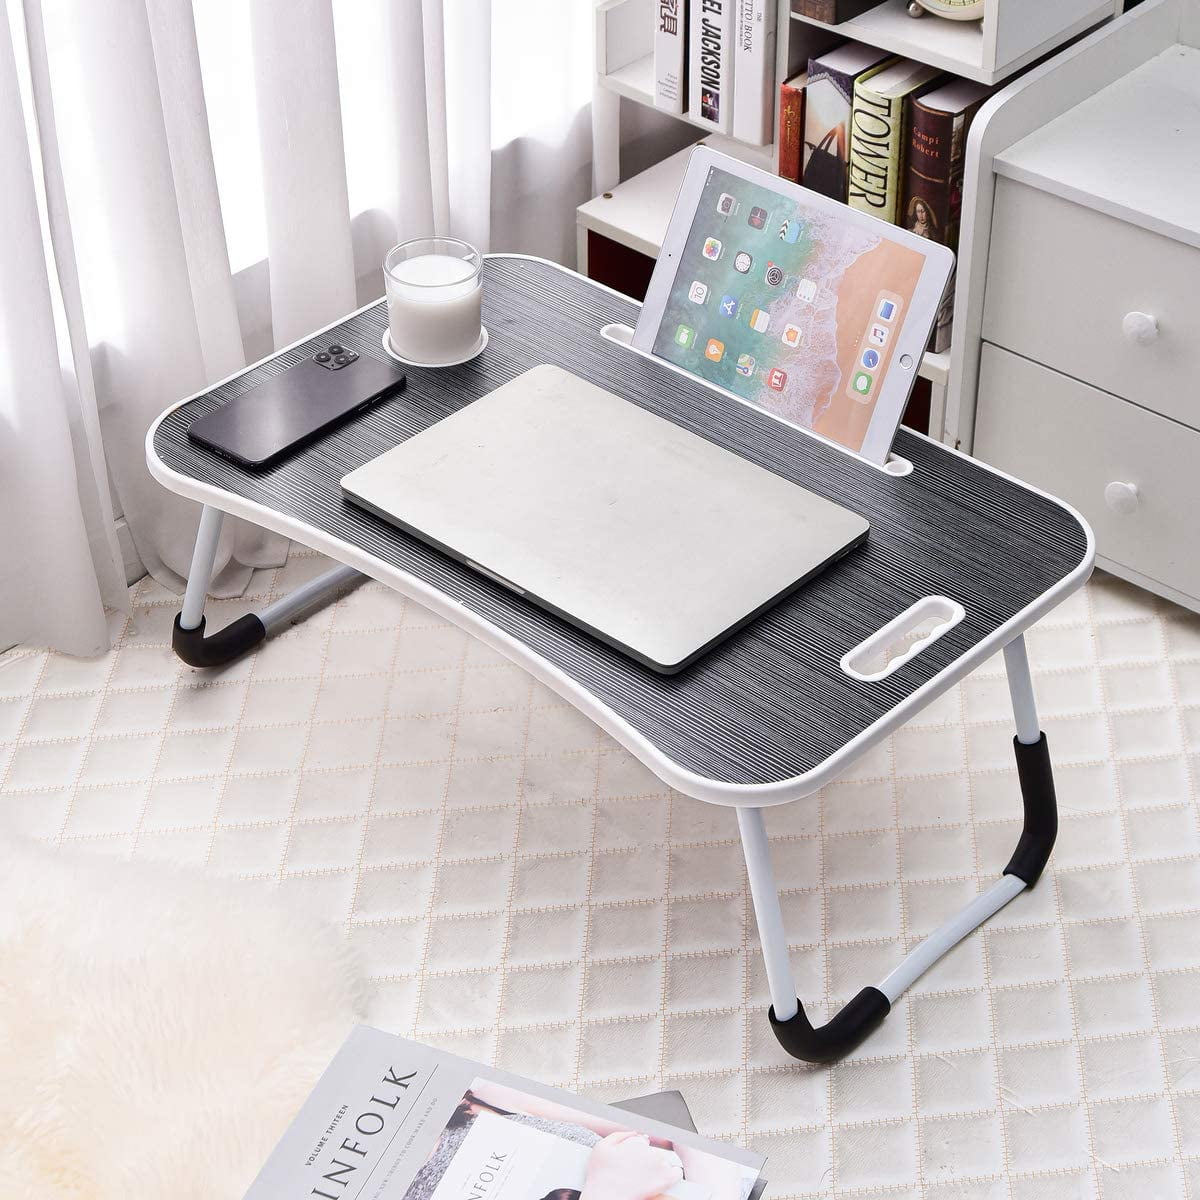 Foldable Small Camping Table-Portable Folding Laptop Bed Tray Breakfast Desk UK 